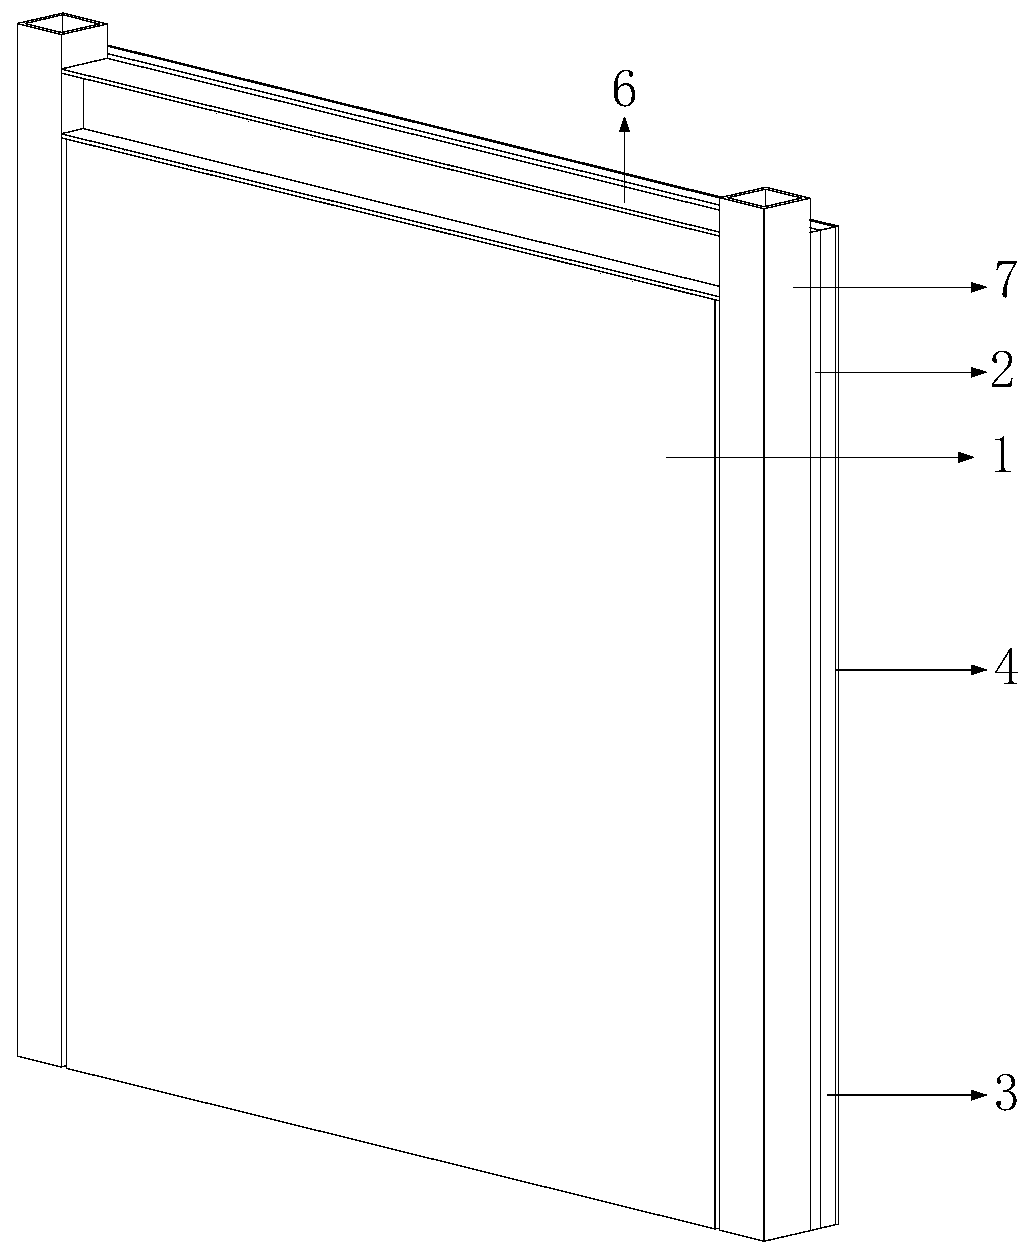 A prefabricated non-load-bearing reinforced concrete-aerated concrete composite wall panel